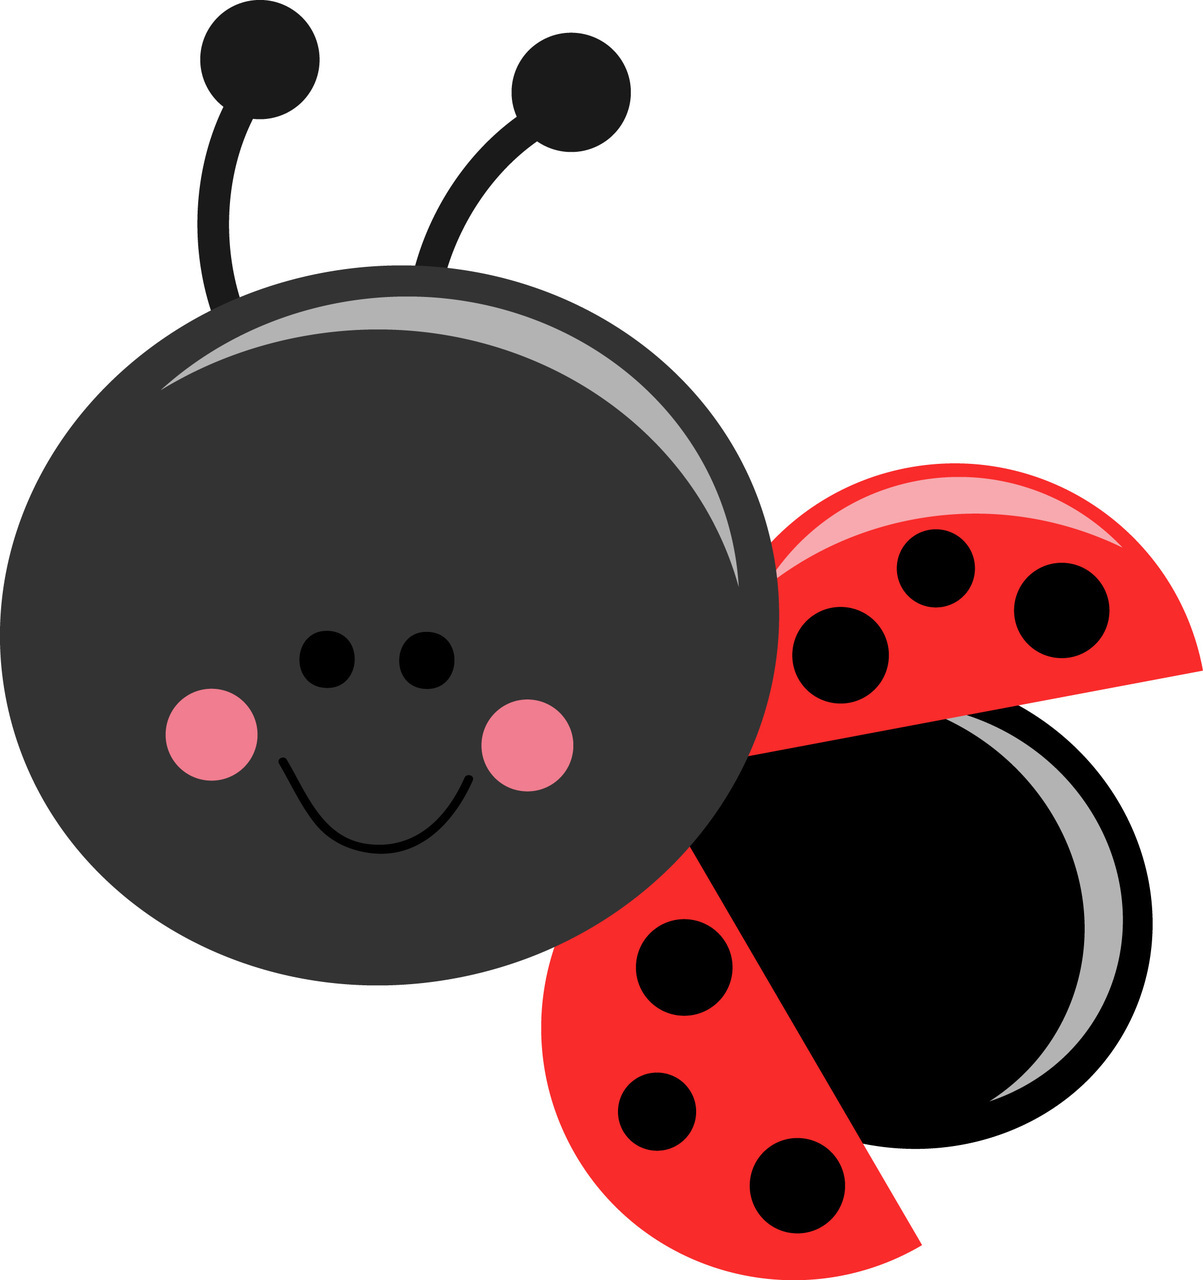 Ladybugs clipart | ClipartMonk - Free Clip Art Images